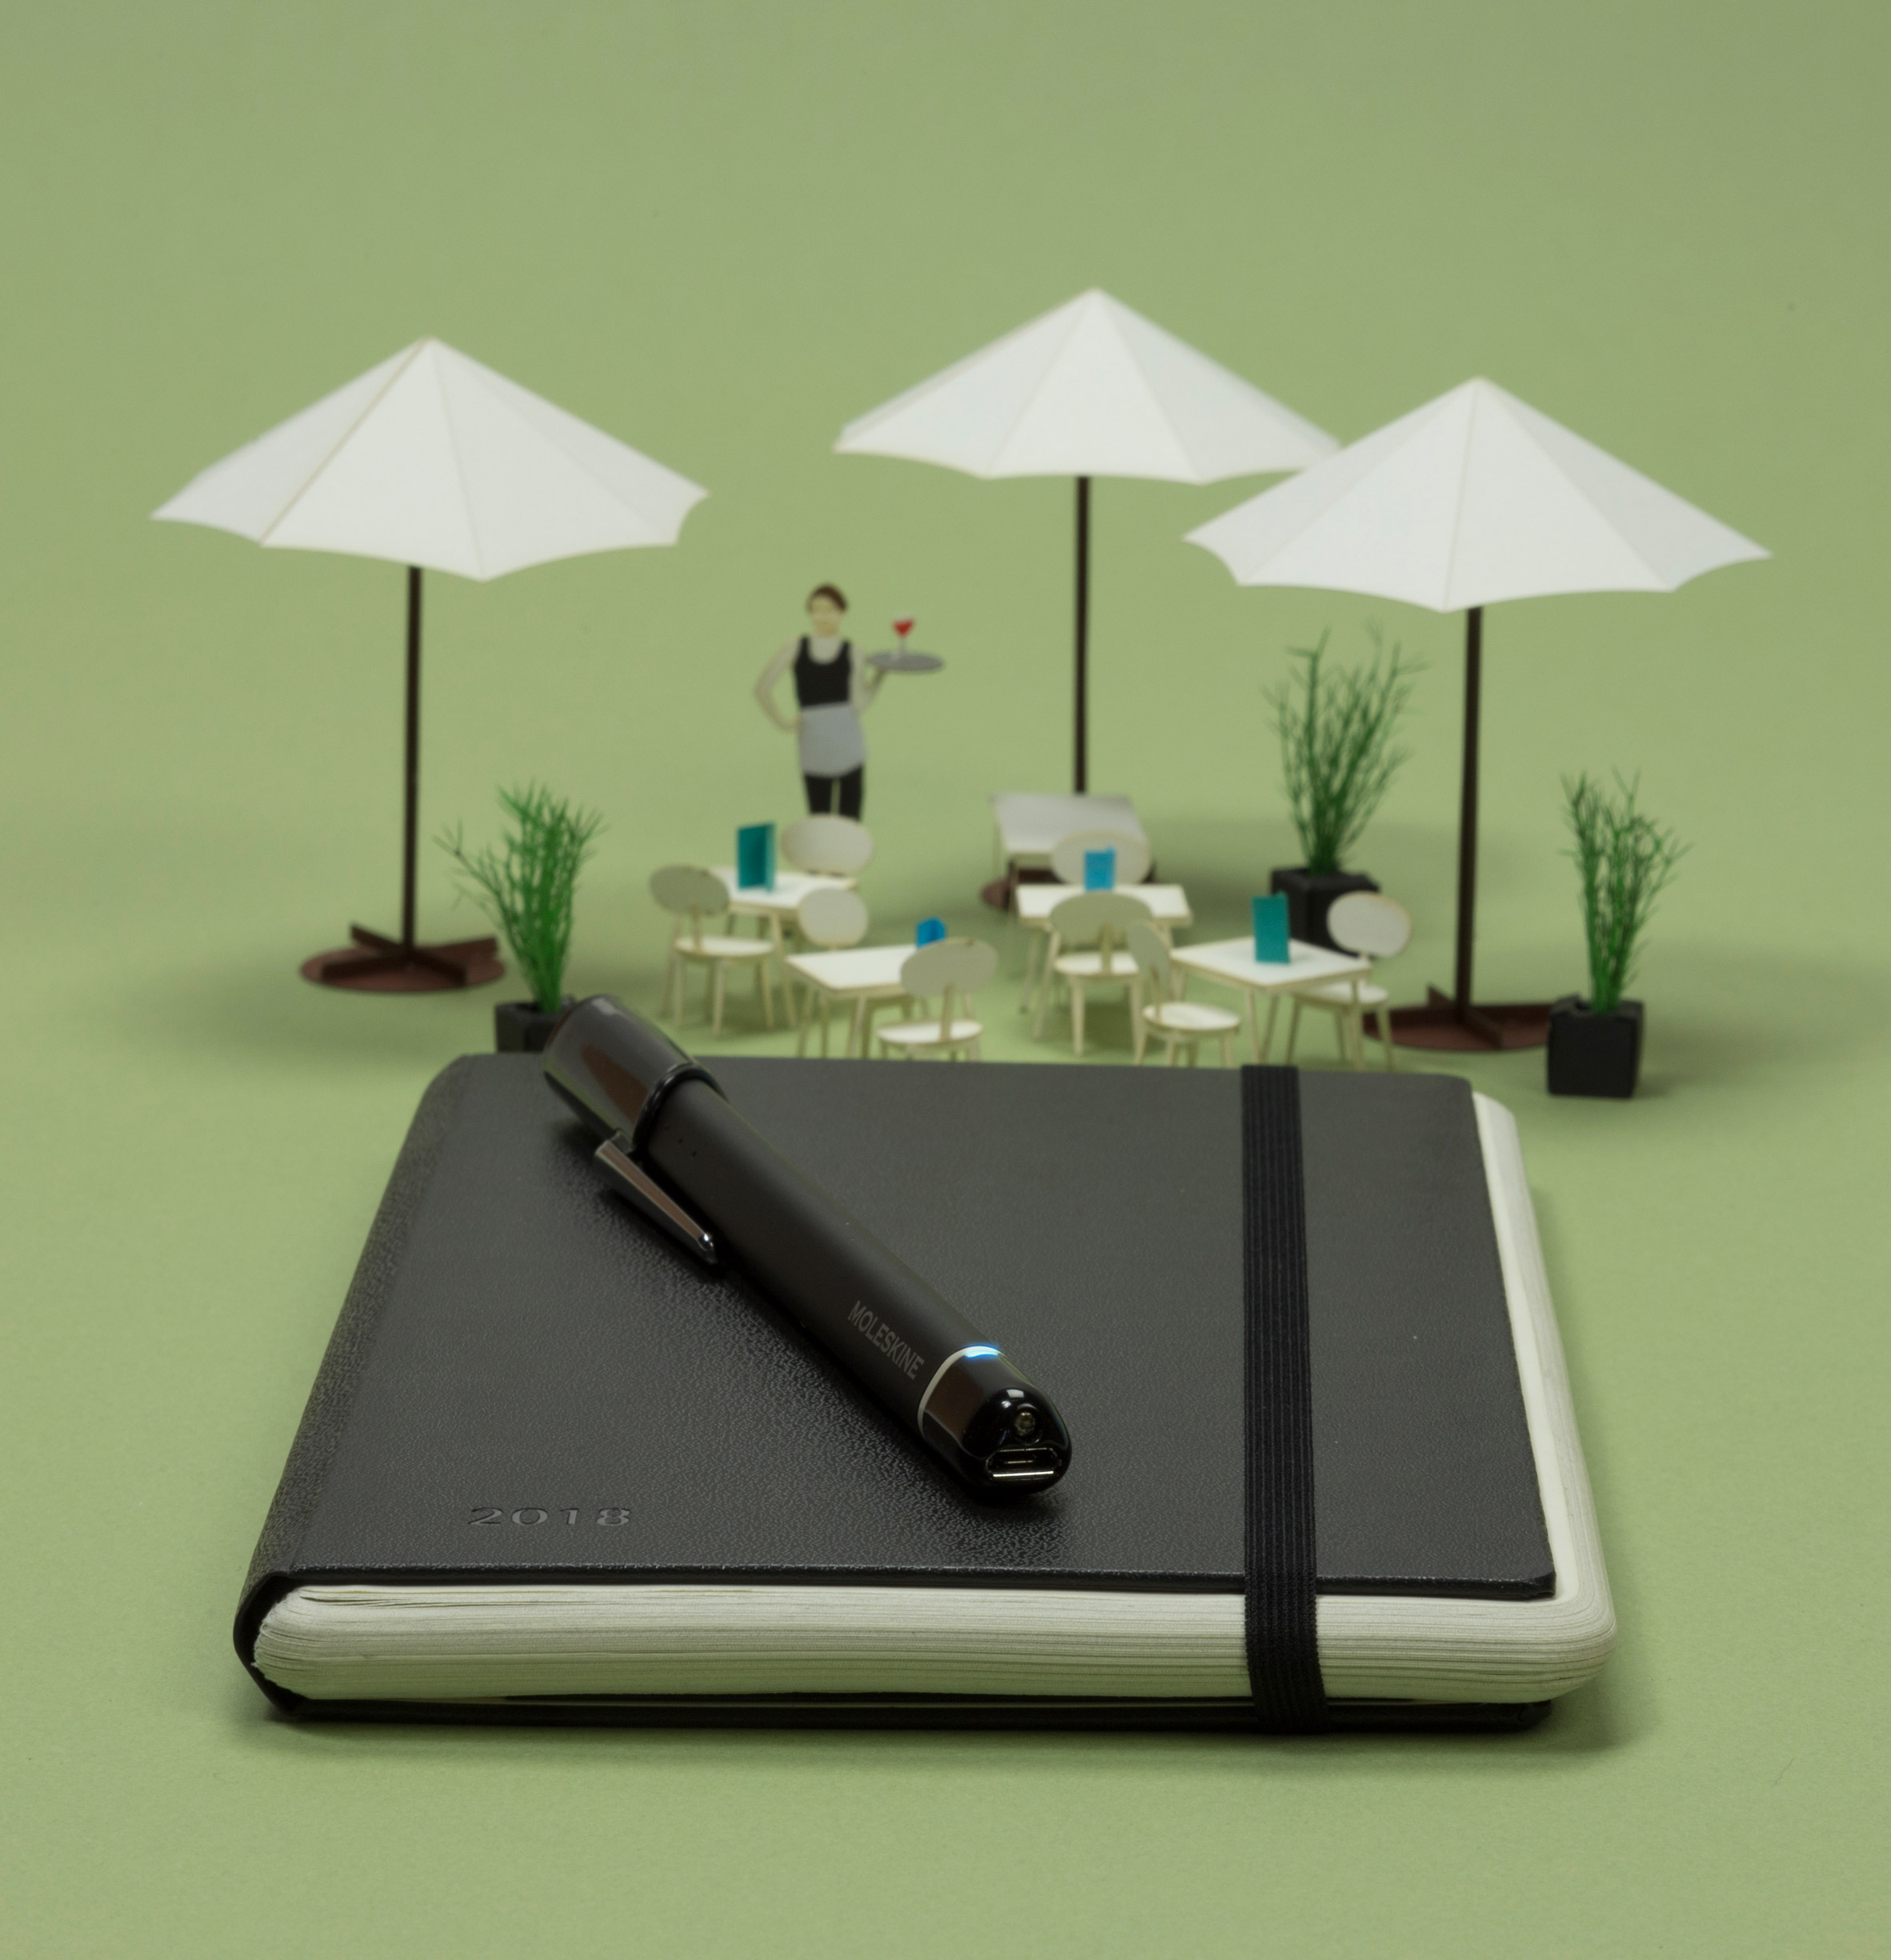 Moleskine's smart planner lets users organise notes on page and screen